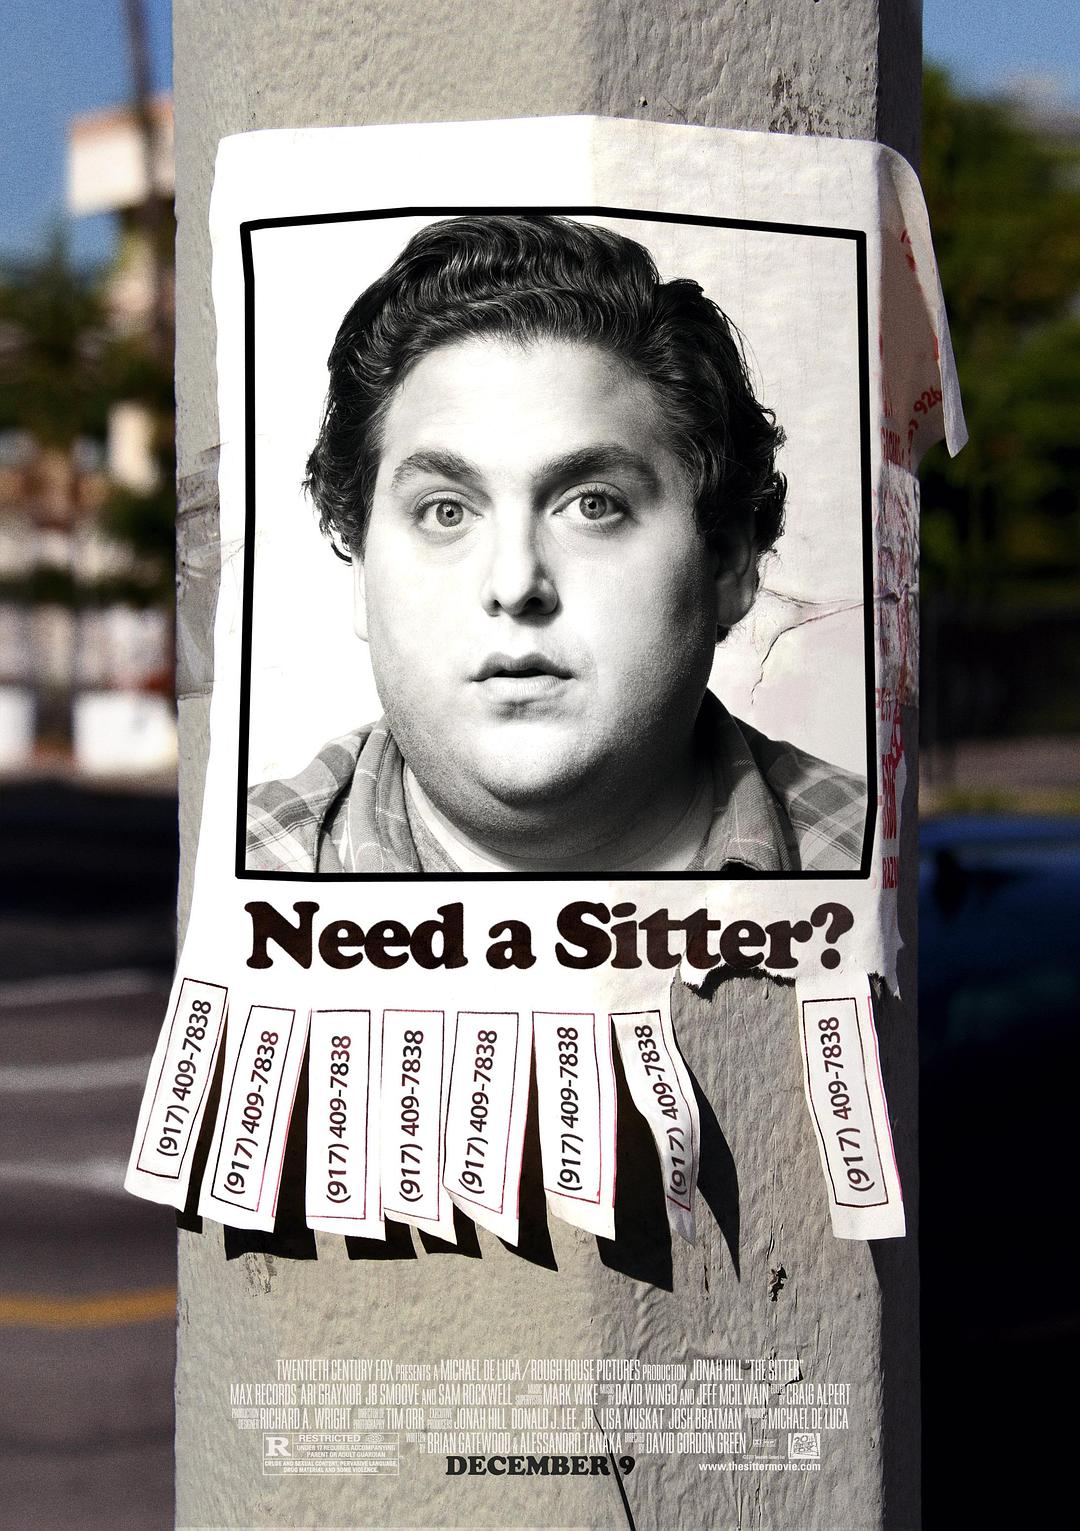 ķ The.Sitter.2011.UNRATED.1080p.BluRay.X264-AMIABLE 6.55GB-1.png